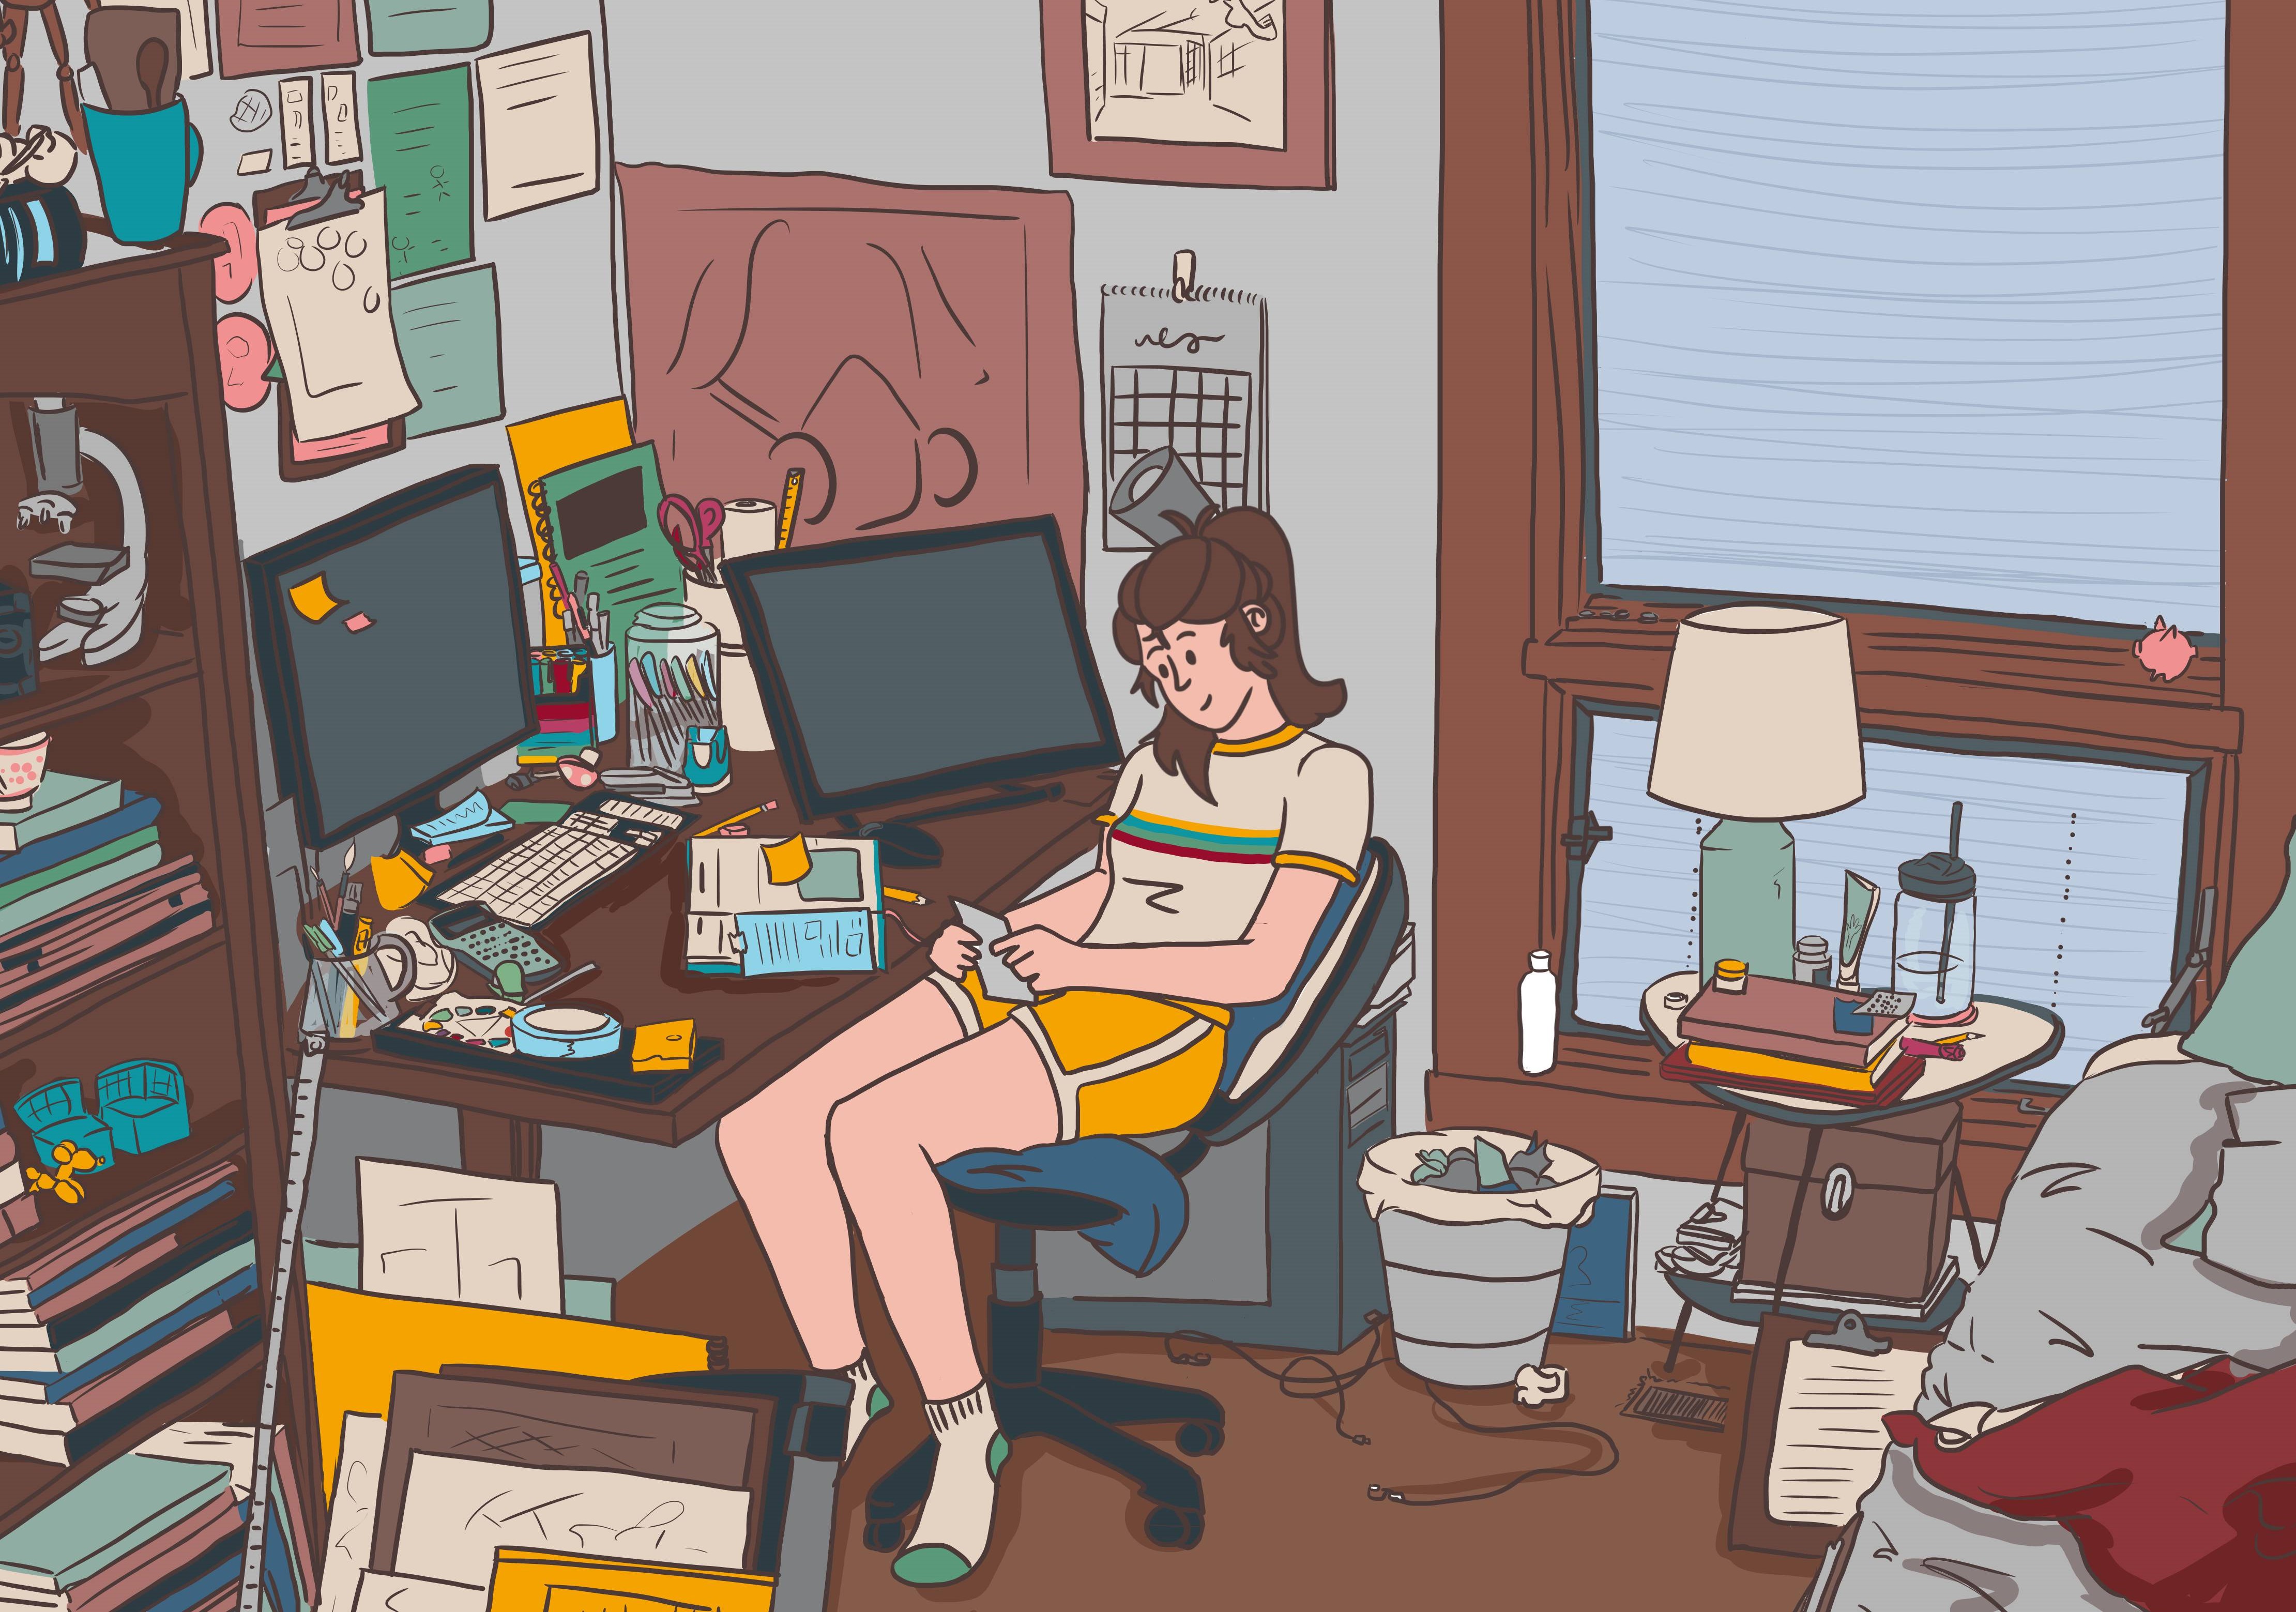 A drawing of Emily sitting at home working at a desk while surrounded by art supplies and a computer